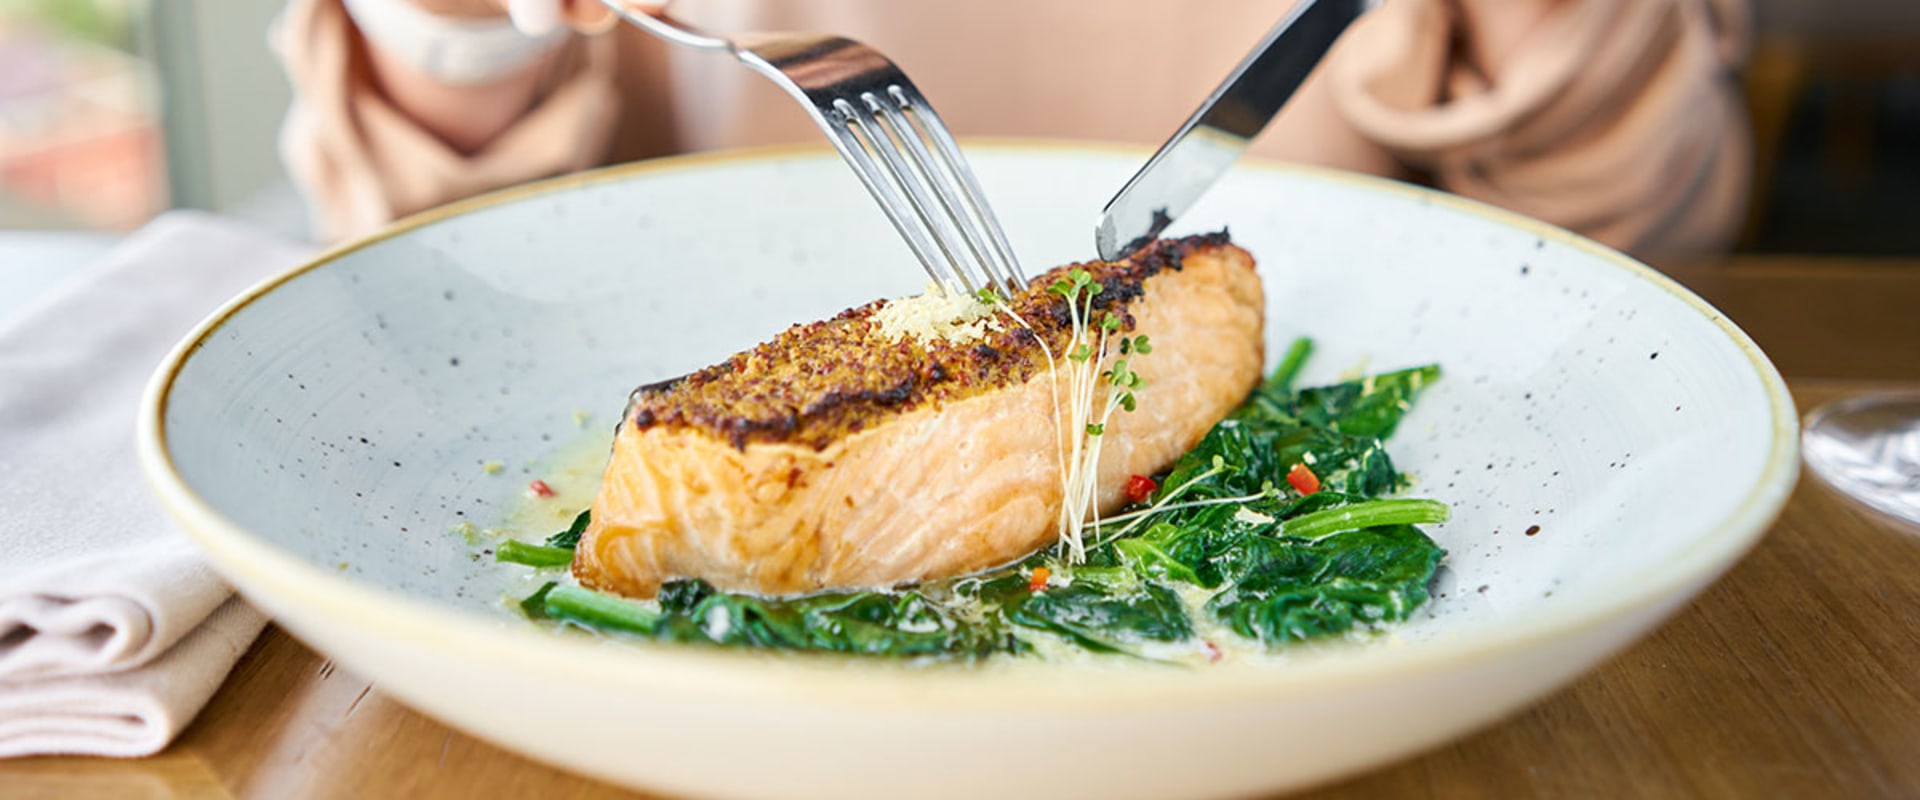 The Health Risks of Eating Too Much Salmon